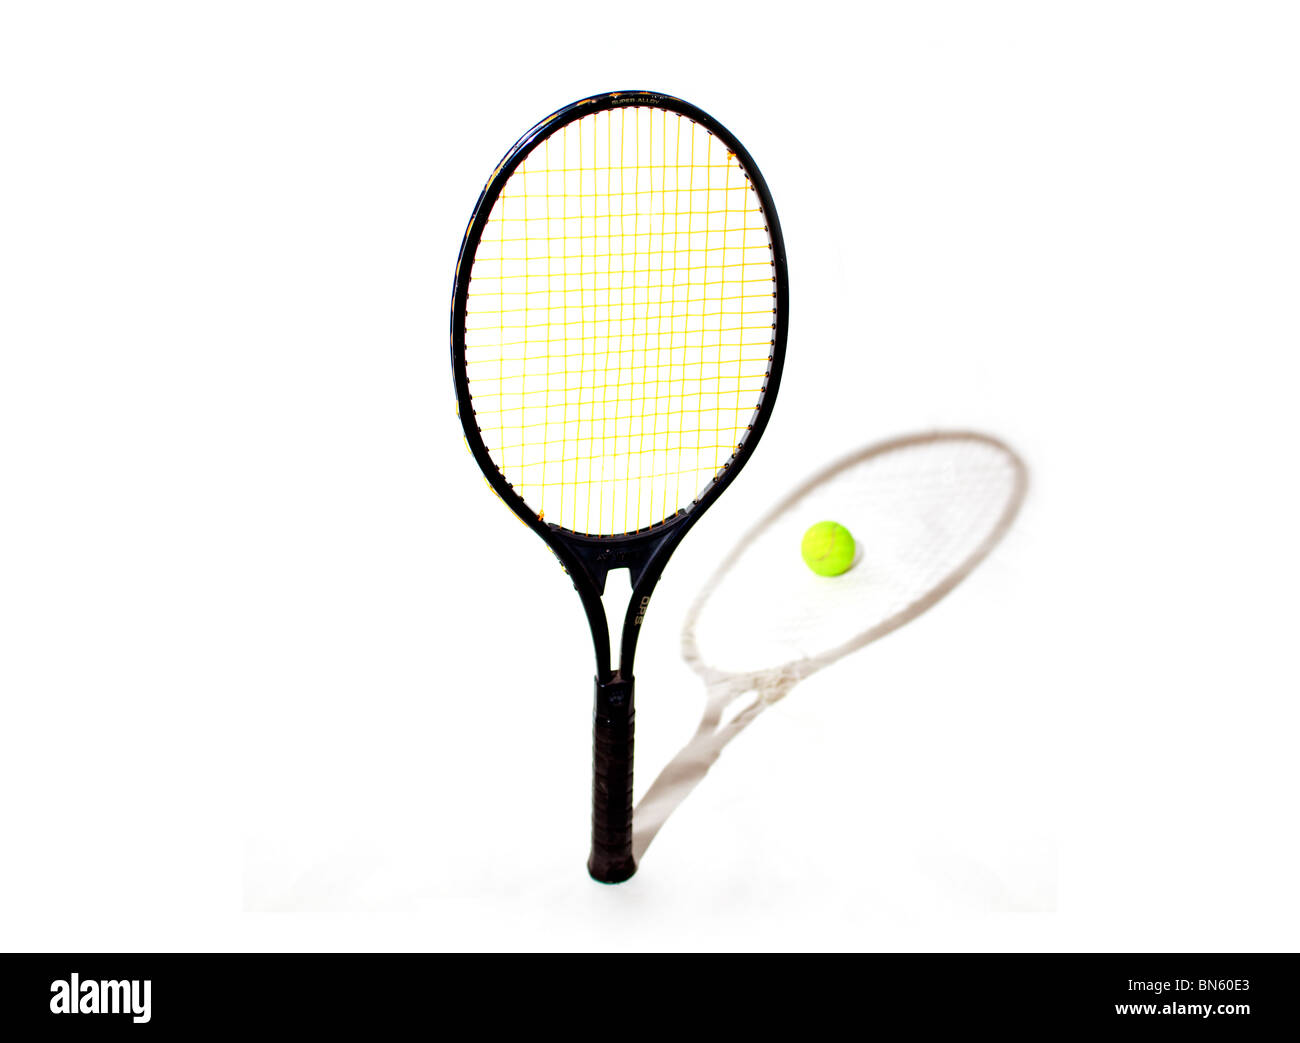 Tennis racket with shadow and ball Stock Photo